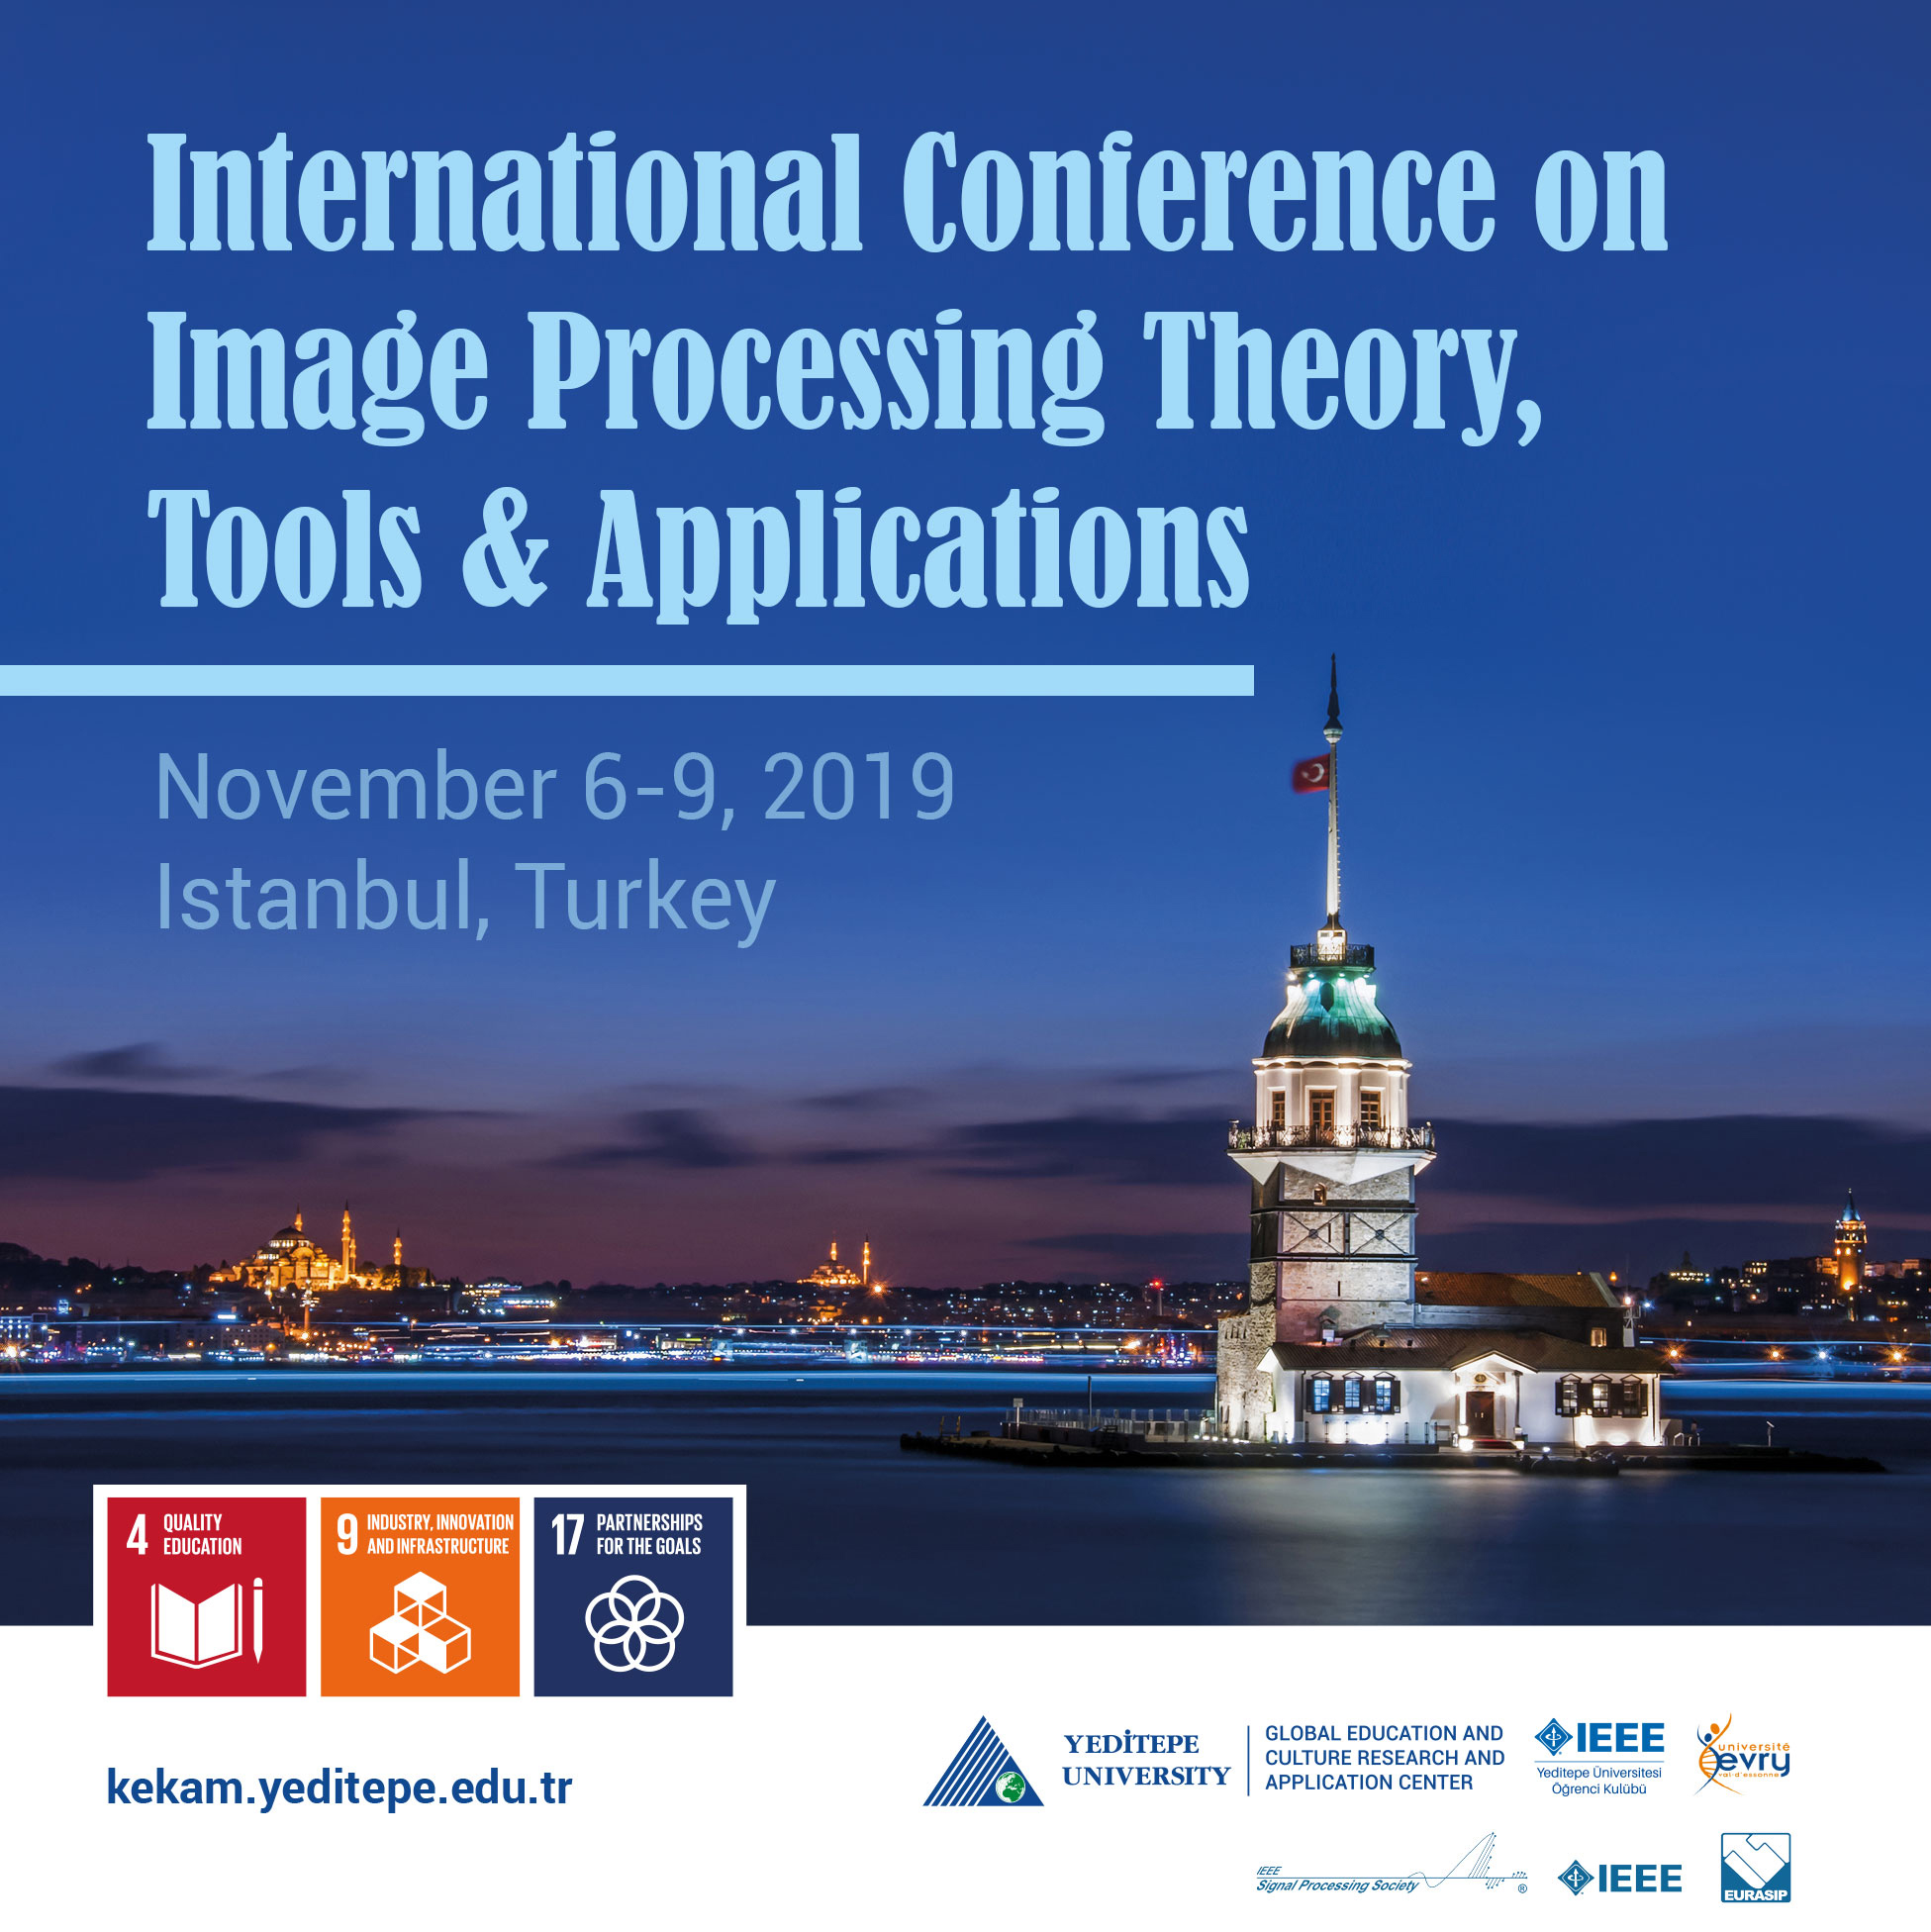 International Conference on Image Processing Theory, Tools & Applications